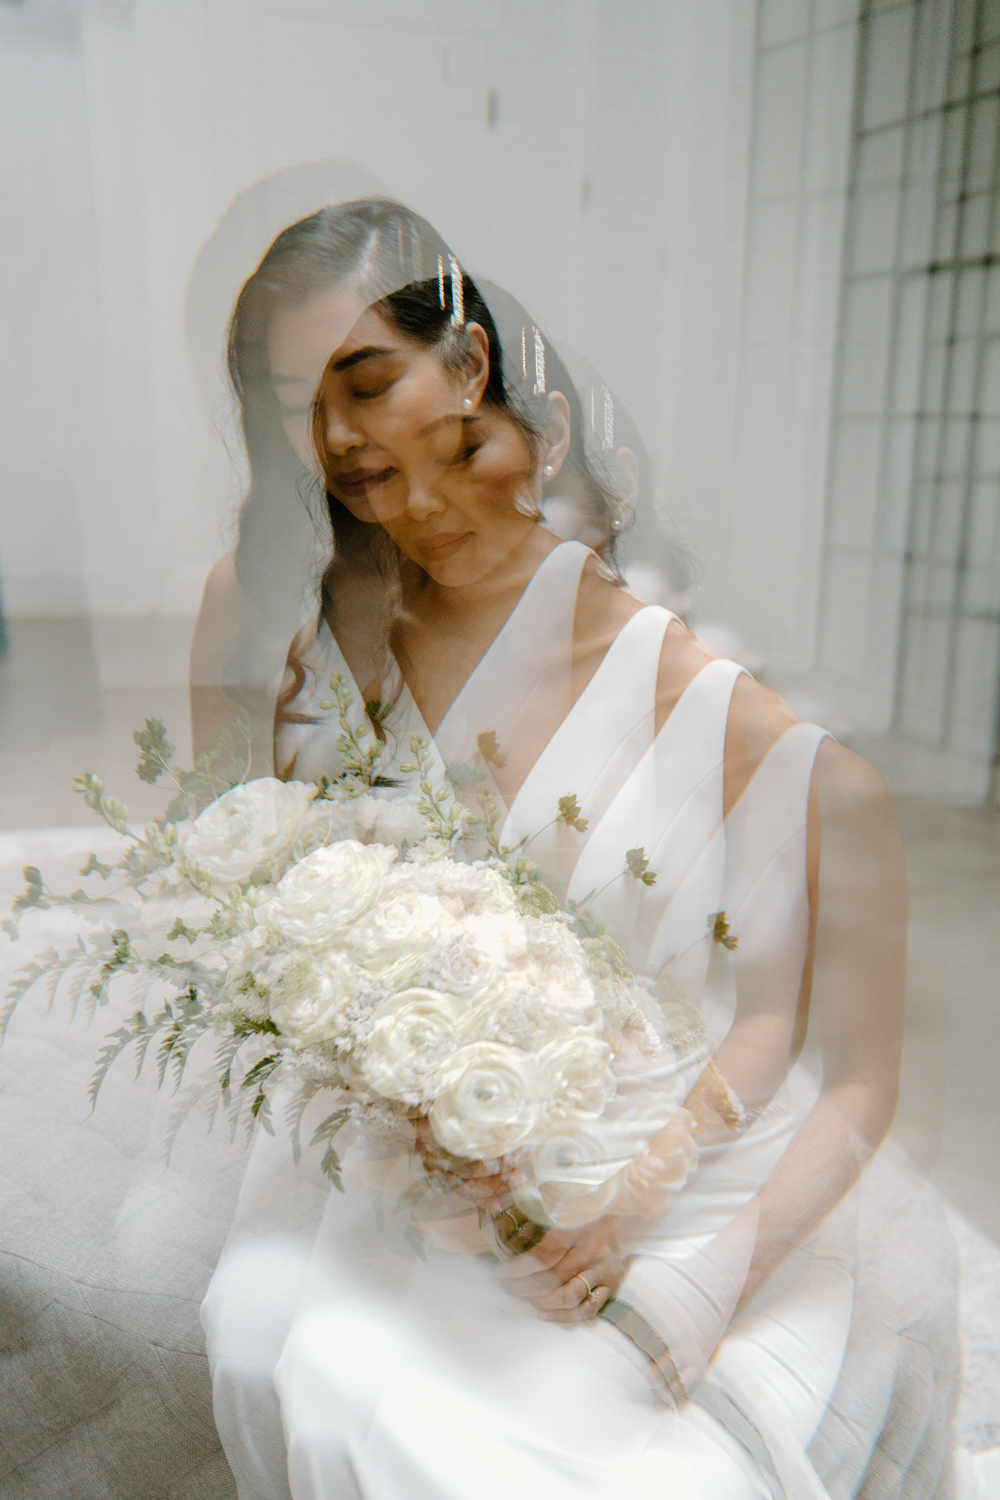 An image of a bride looking down at her bouquet taken through a linear prism on her wedding day in Minneapolis.